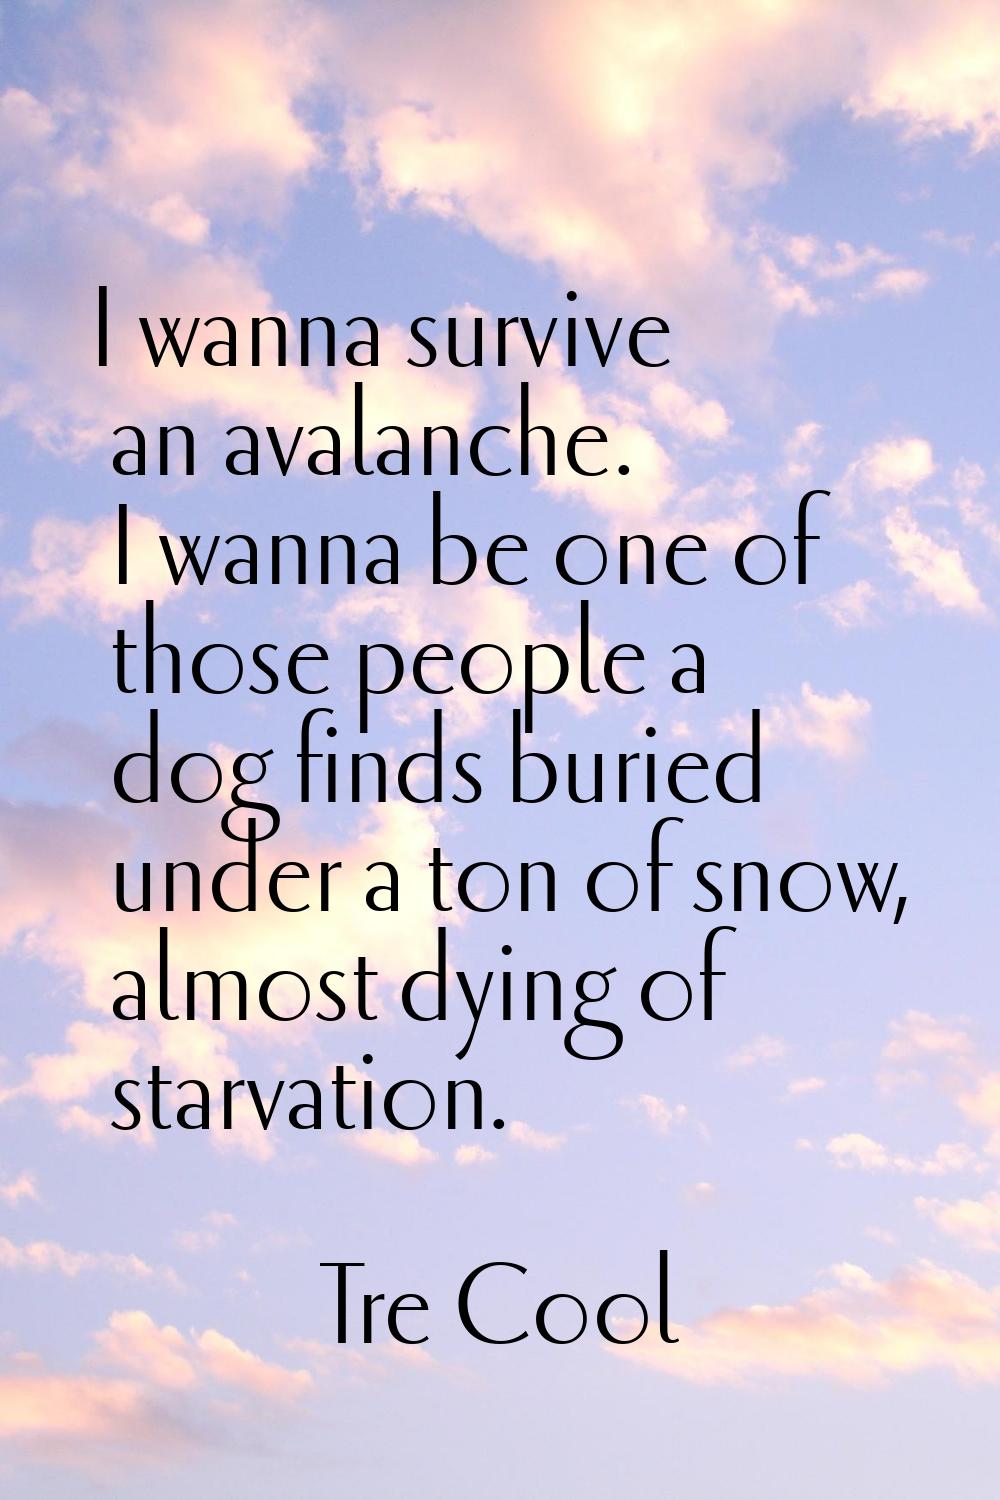 I wanna survive an avalanche. I wanna be one of those people a dog finds buried under a ton of snow